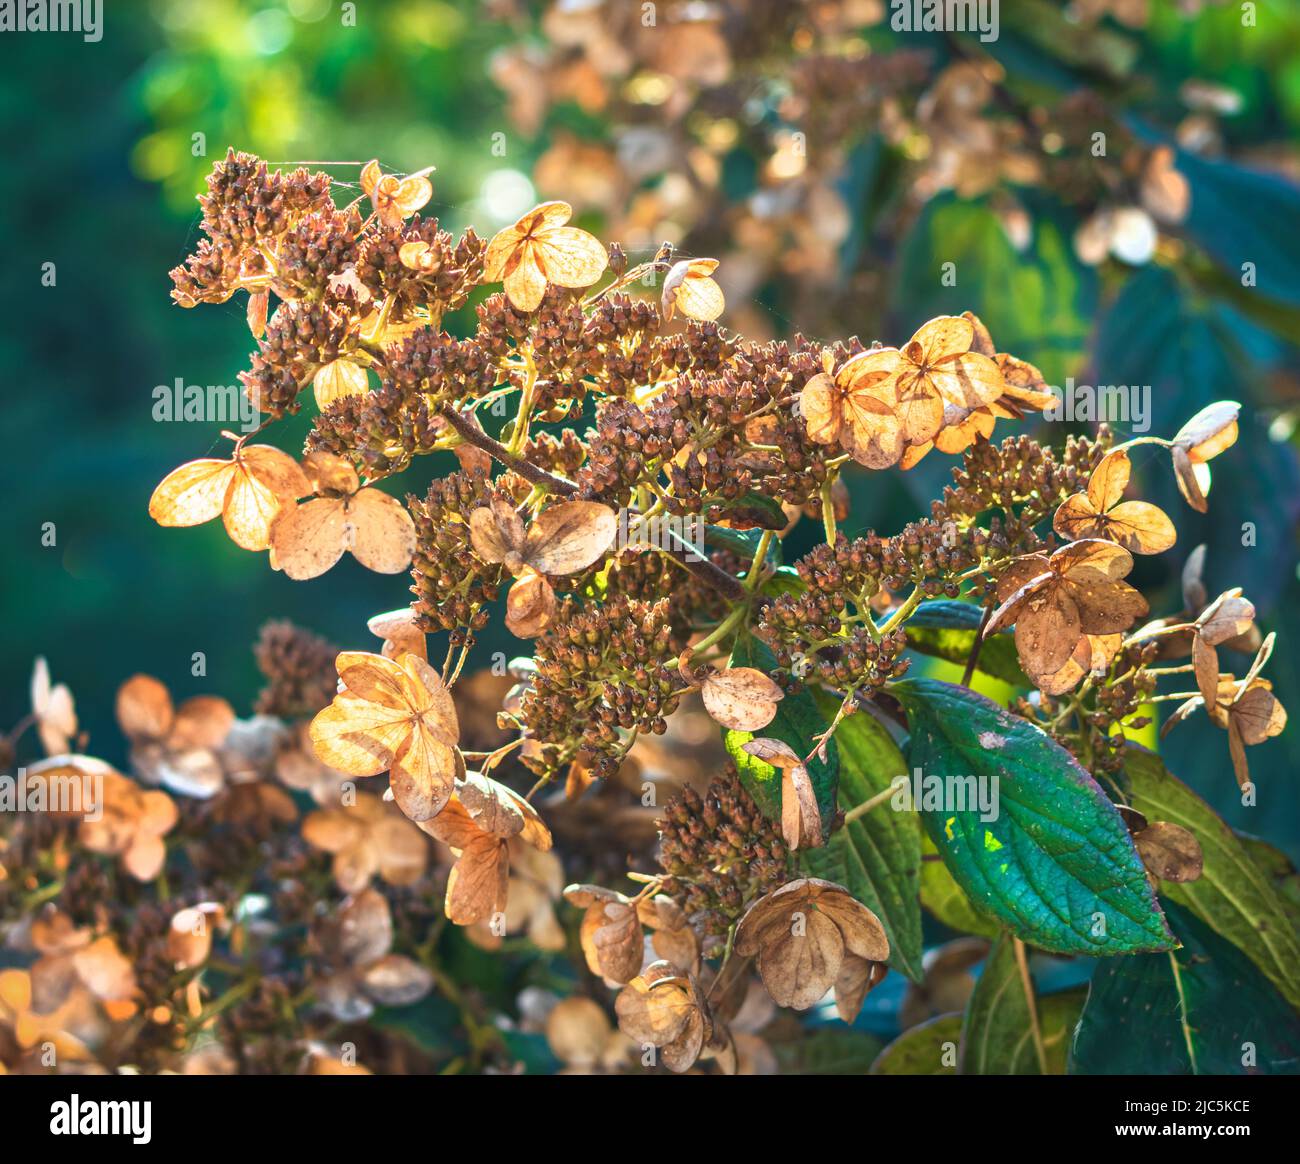 Hydrangea branches, Hydrangea macrophylla, at the end of summer or beginning of fall after all the flowers have dried, Lancaster County, Pennsylvania Stock Photo